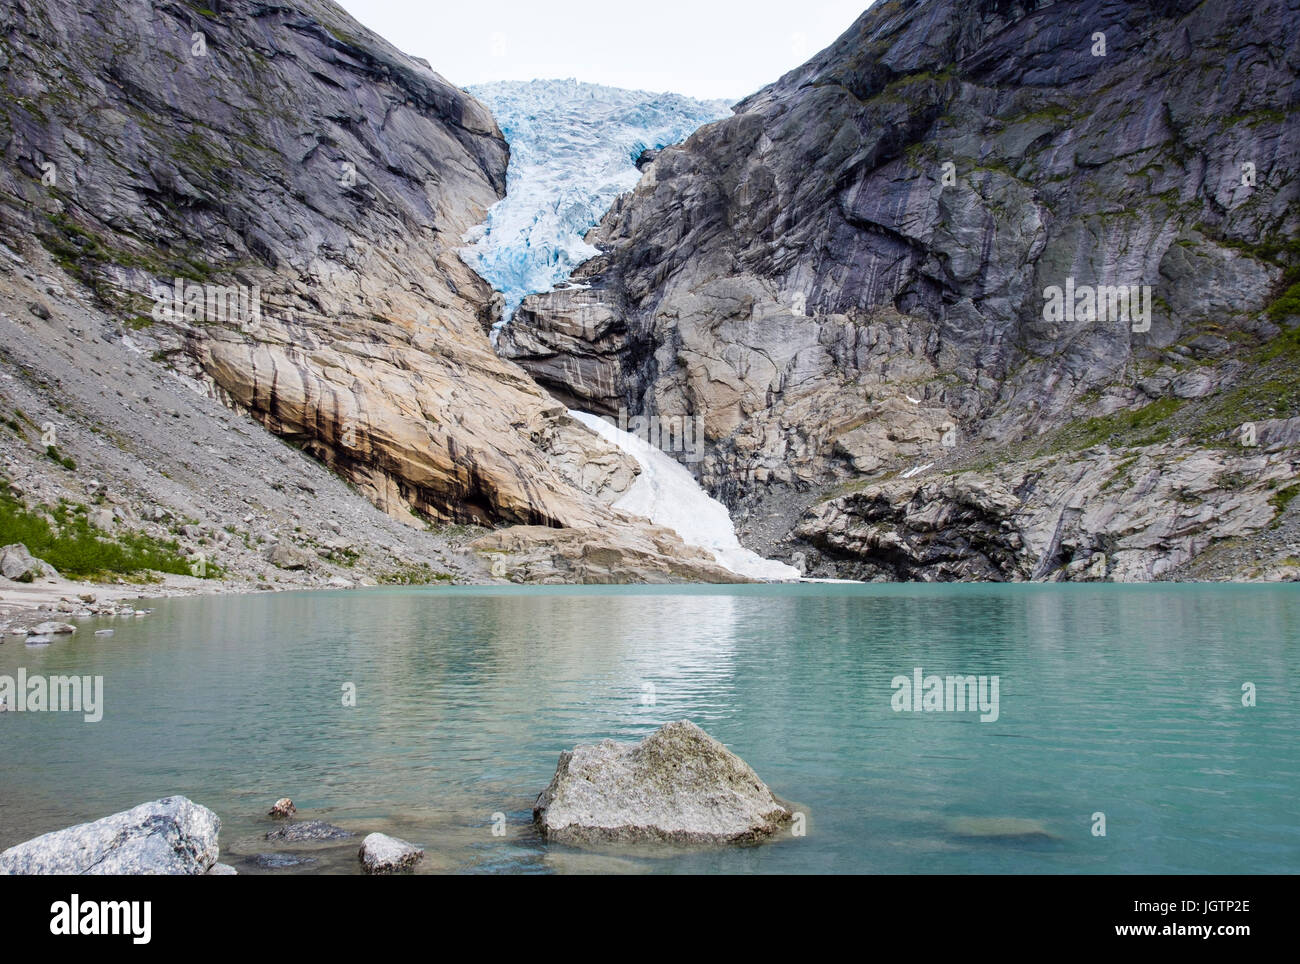 Briksdalsbreen or Briksdal glacier is an arm of Jostedalsbreen glacier  above Briksdalsbrevatnet glacial lake in Jostedalsbreen National Park Norway  Stock Photo - Alamy